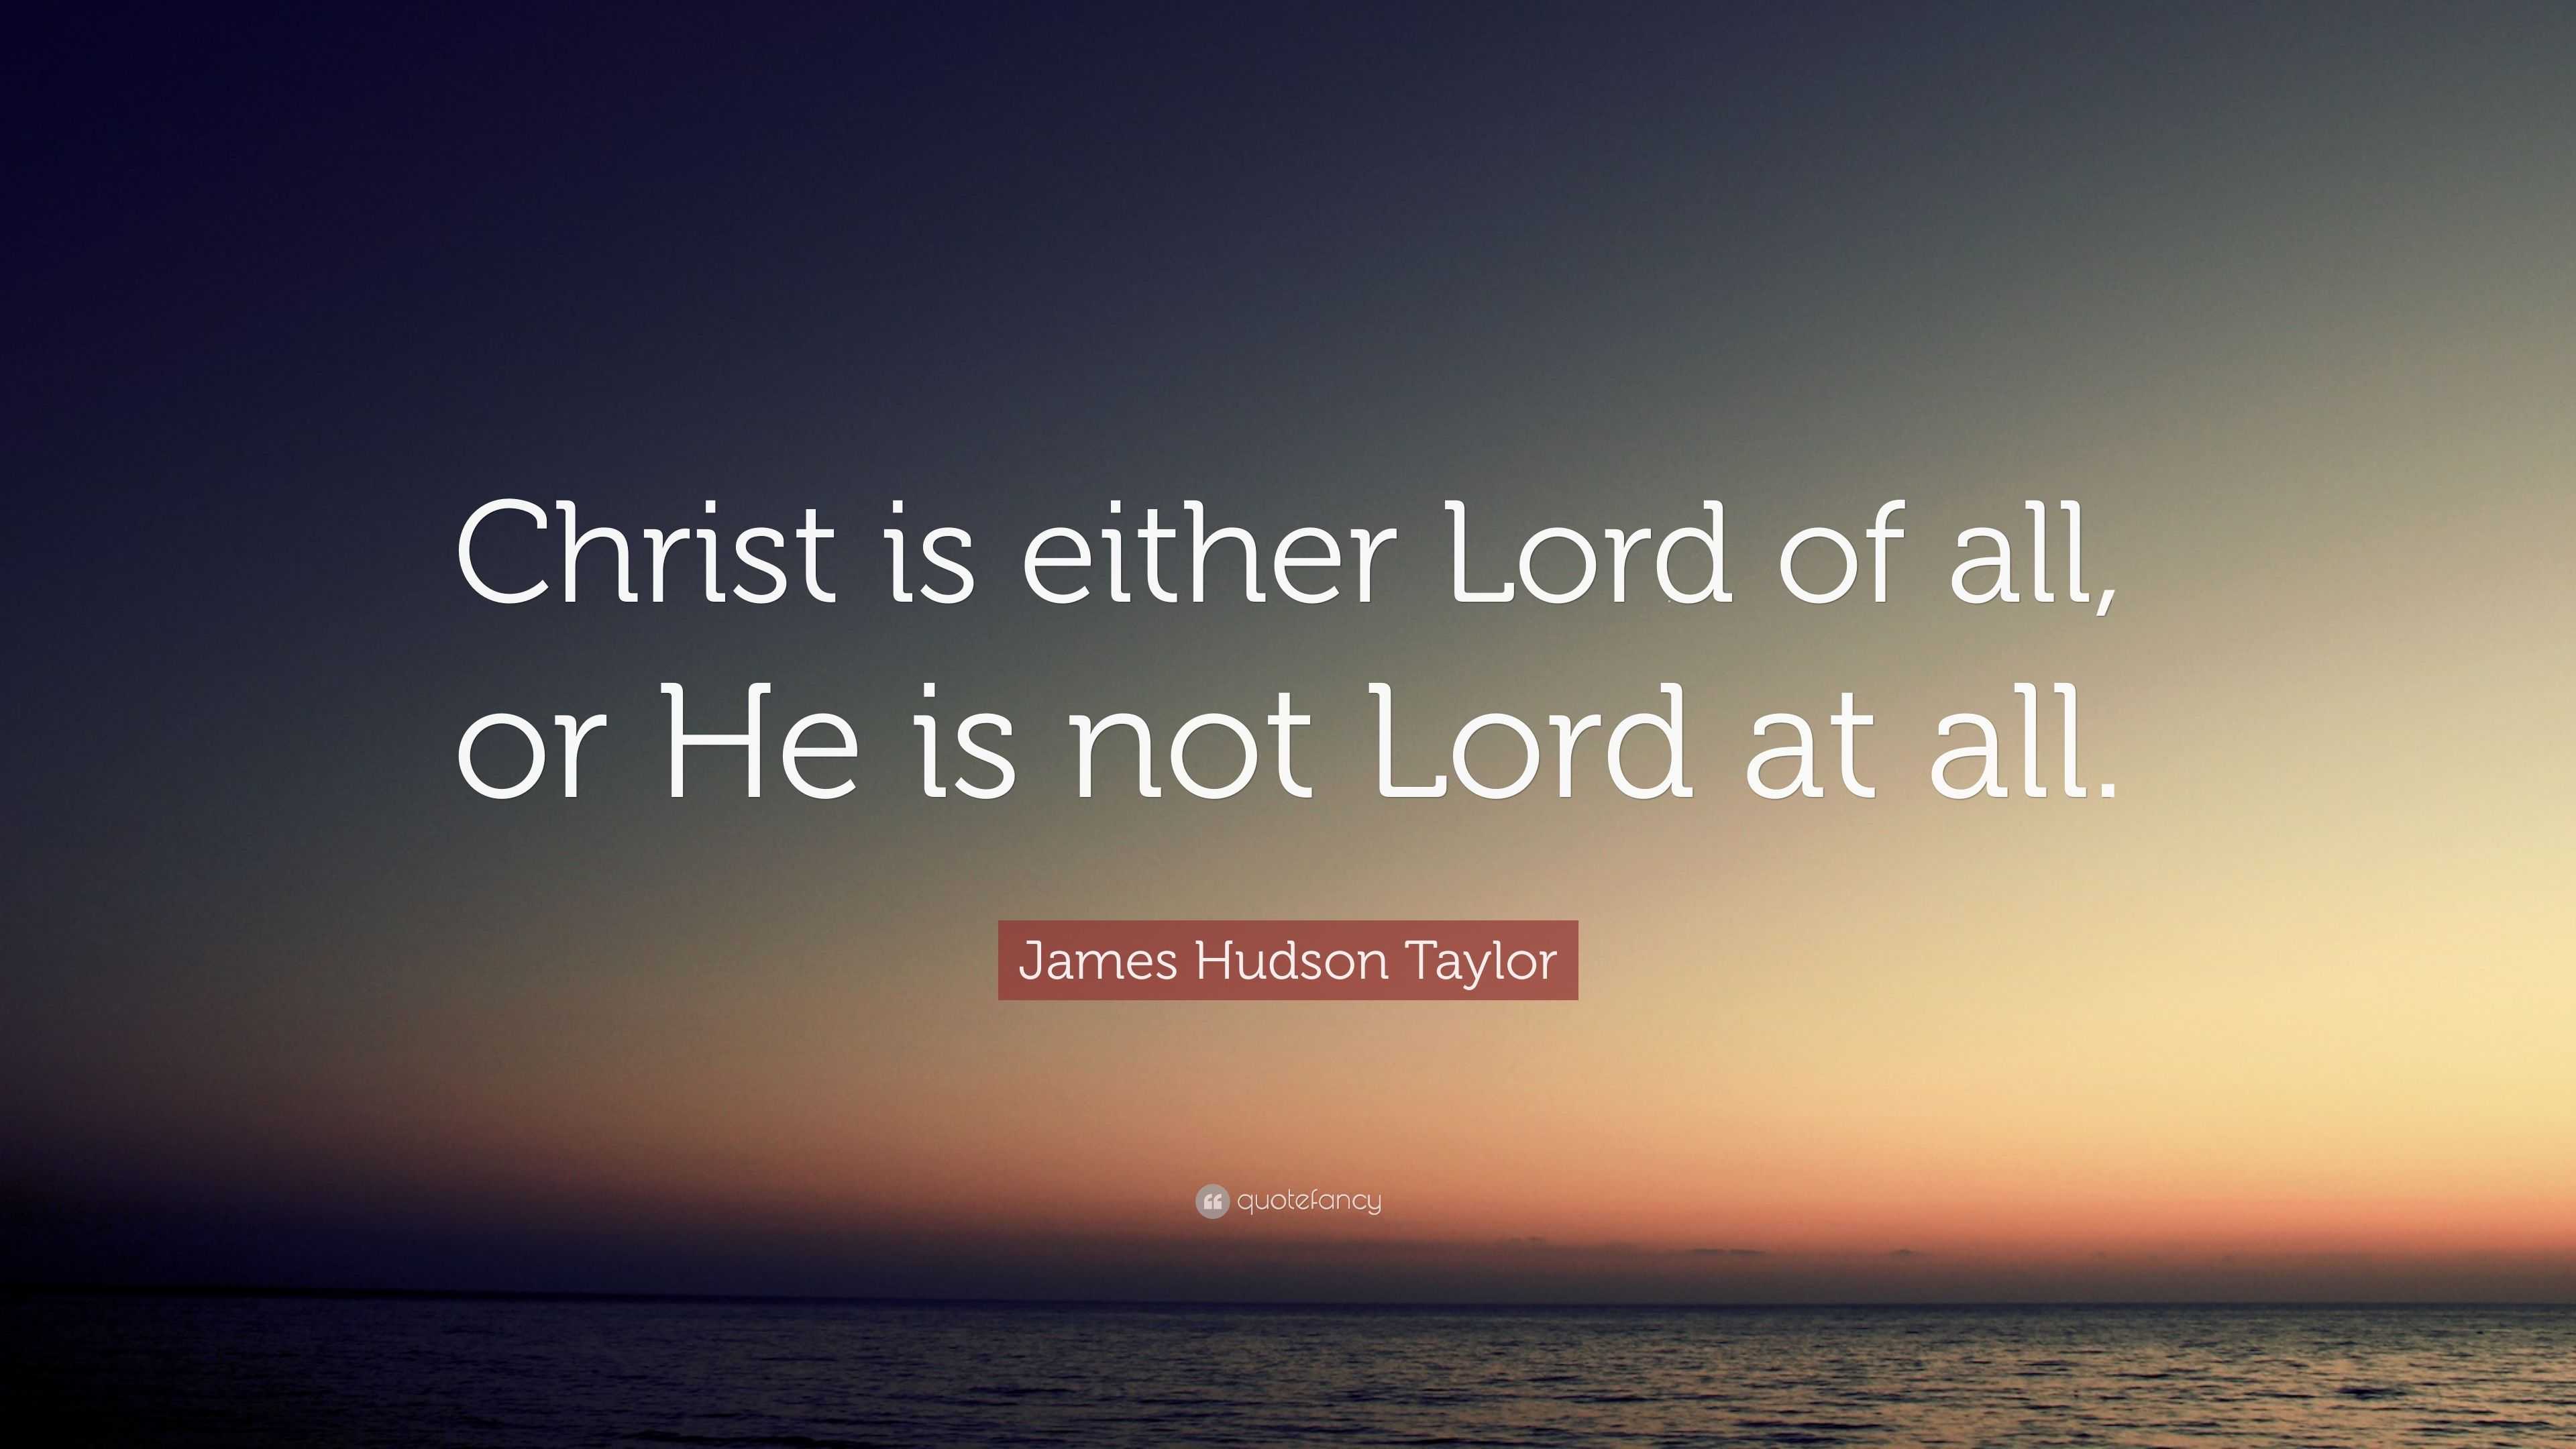 James Hudson Taylor Quote: “Christ is either Lord of all, or He is not